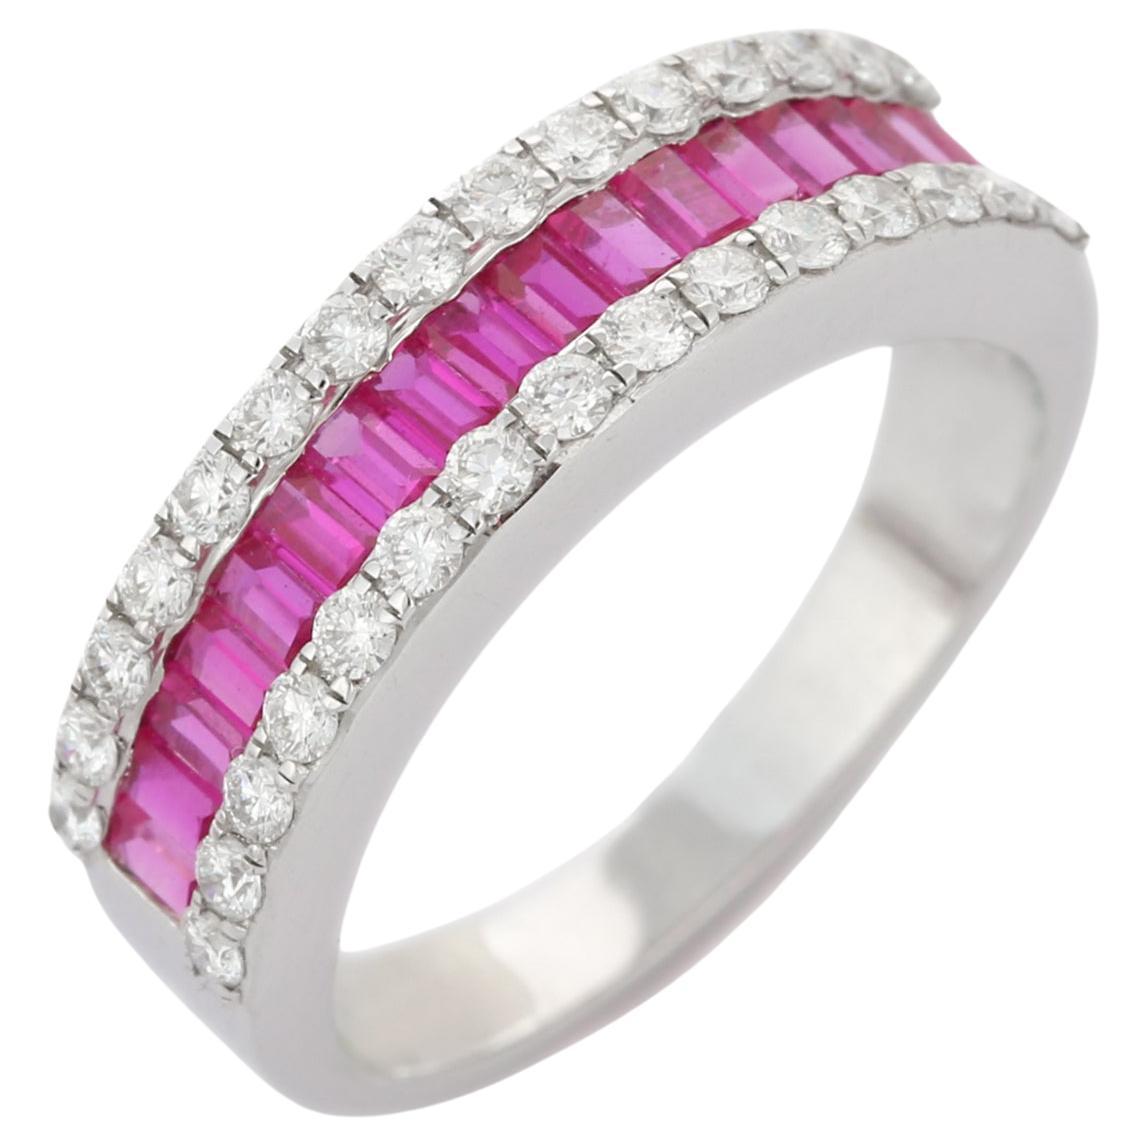 18K White Gold 0.76 Ct Ruby Wedding Band Ring with Diamonds